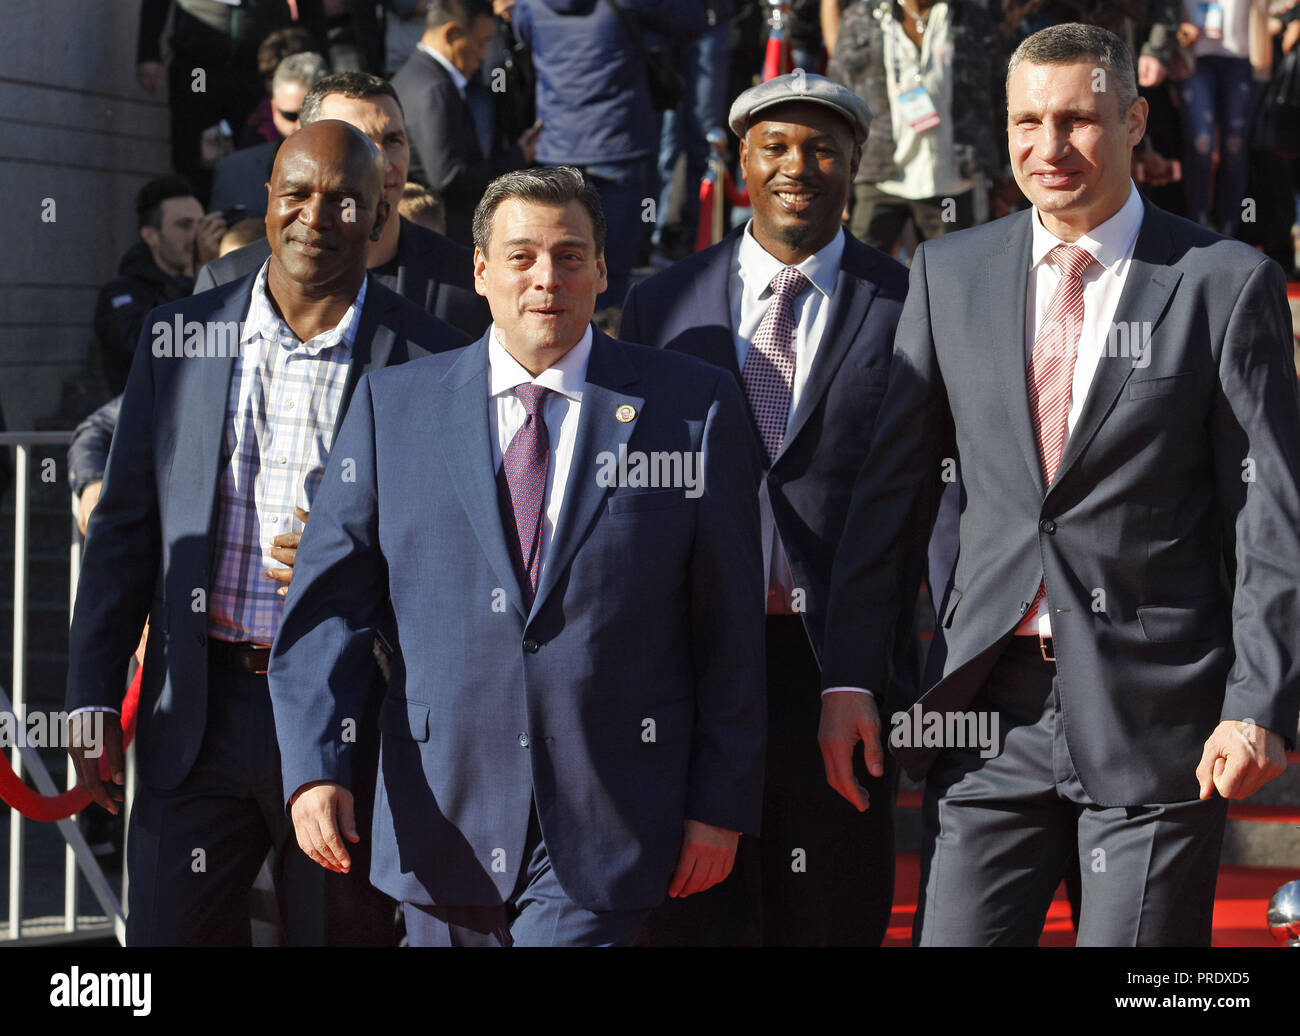 Kiev, Ukraine. 1st Oct, 2018. Evander Holyfield, former Boxing Champion (L), Mauricio Sulaiman, President of the World Boxing Council (WBC) (2-L), Lennox Lewis, former Boxing Champion (2-R) and Vitali Klitschko, former heavyweight boxing champion and current Mayor of Kiev (R) arrive to take part at ceremony of opening of the 56th WBC Convention in Kiev, Ukraine. The 56th WBC Convention in which take part boxing legends Evander Holyfield, Lennox Lewis, Eric Morales and about 700 participants from 160 countries runs in Kiev from September 30 to October 5. (Credit Image: © Pavlo Gonchar/SOPA I Stock Photo